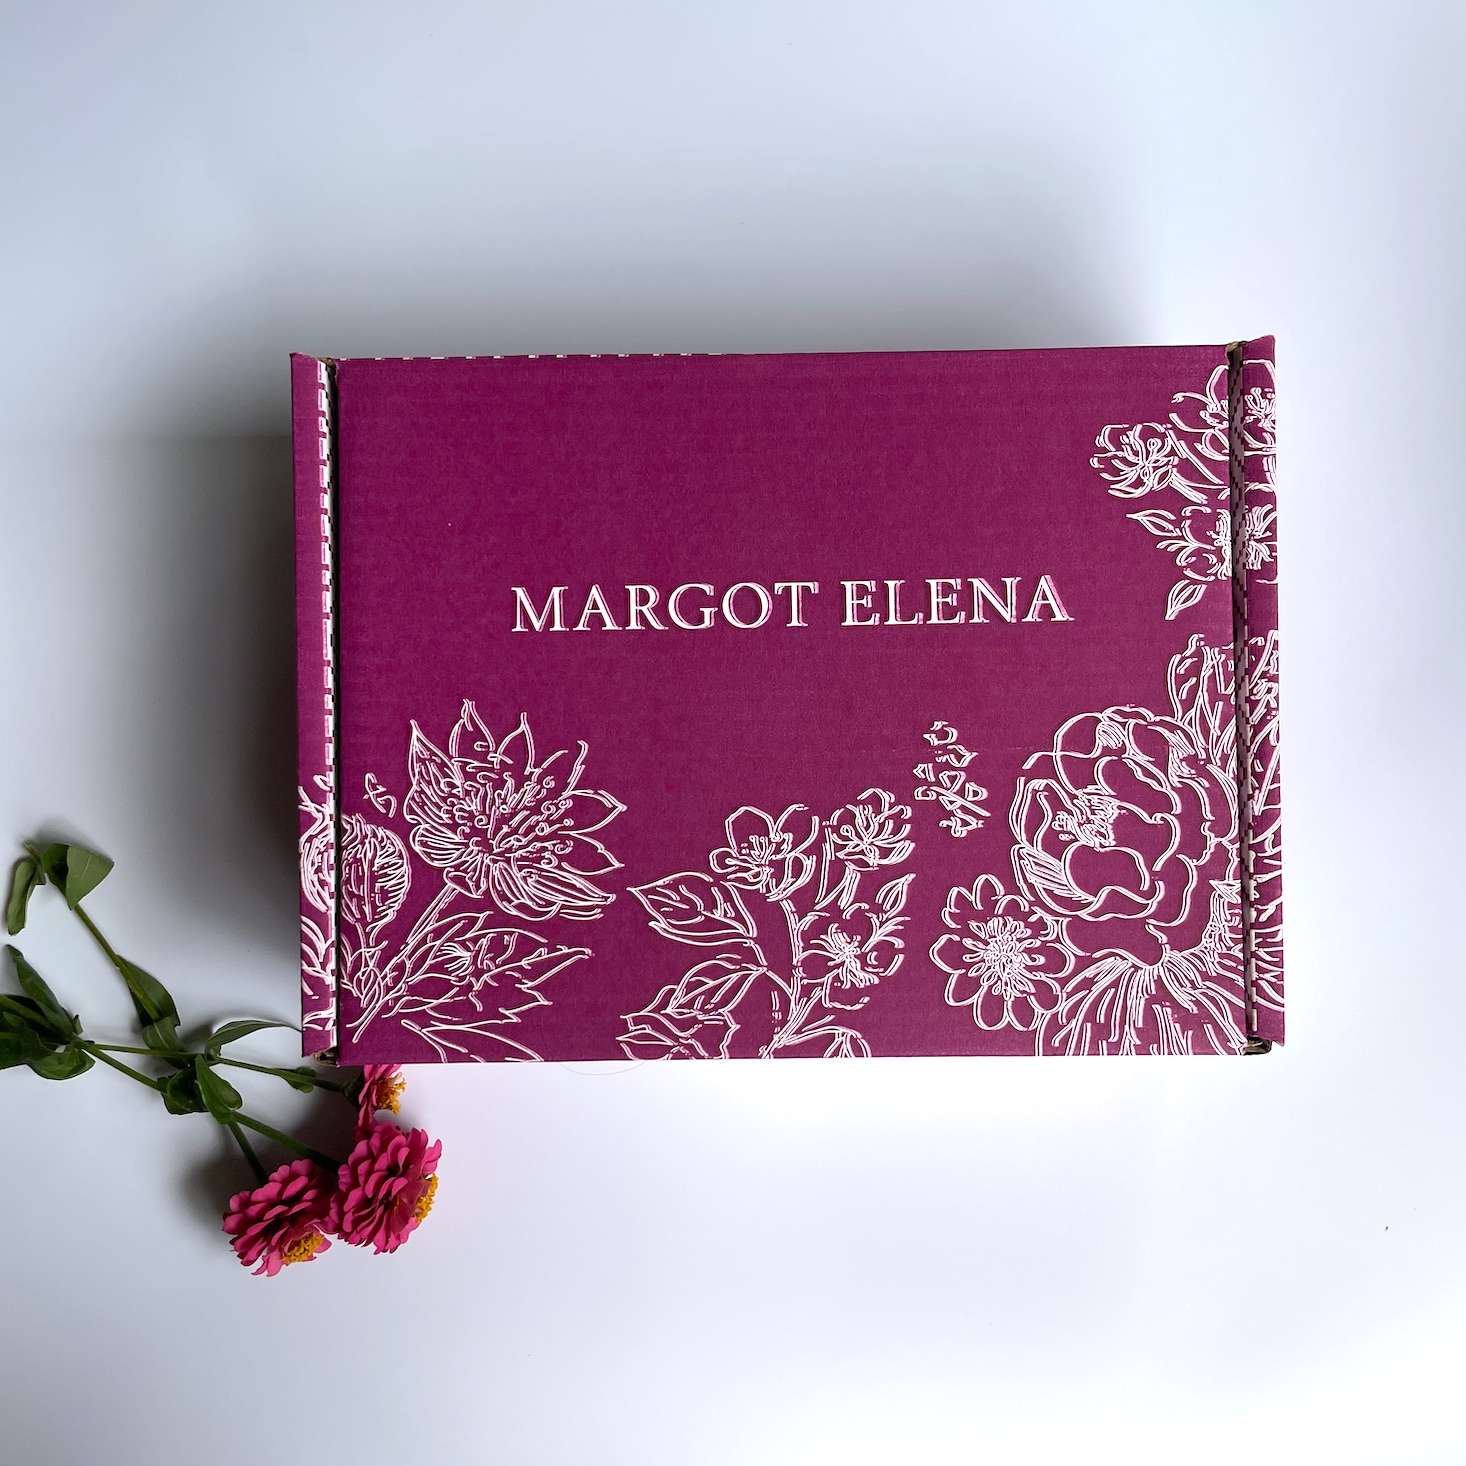 Margot Elena Discovery Box Fall 2022 Review + Exclusive MSA Coupon